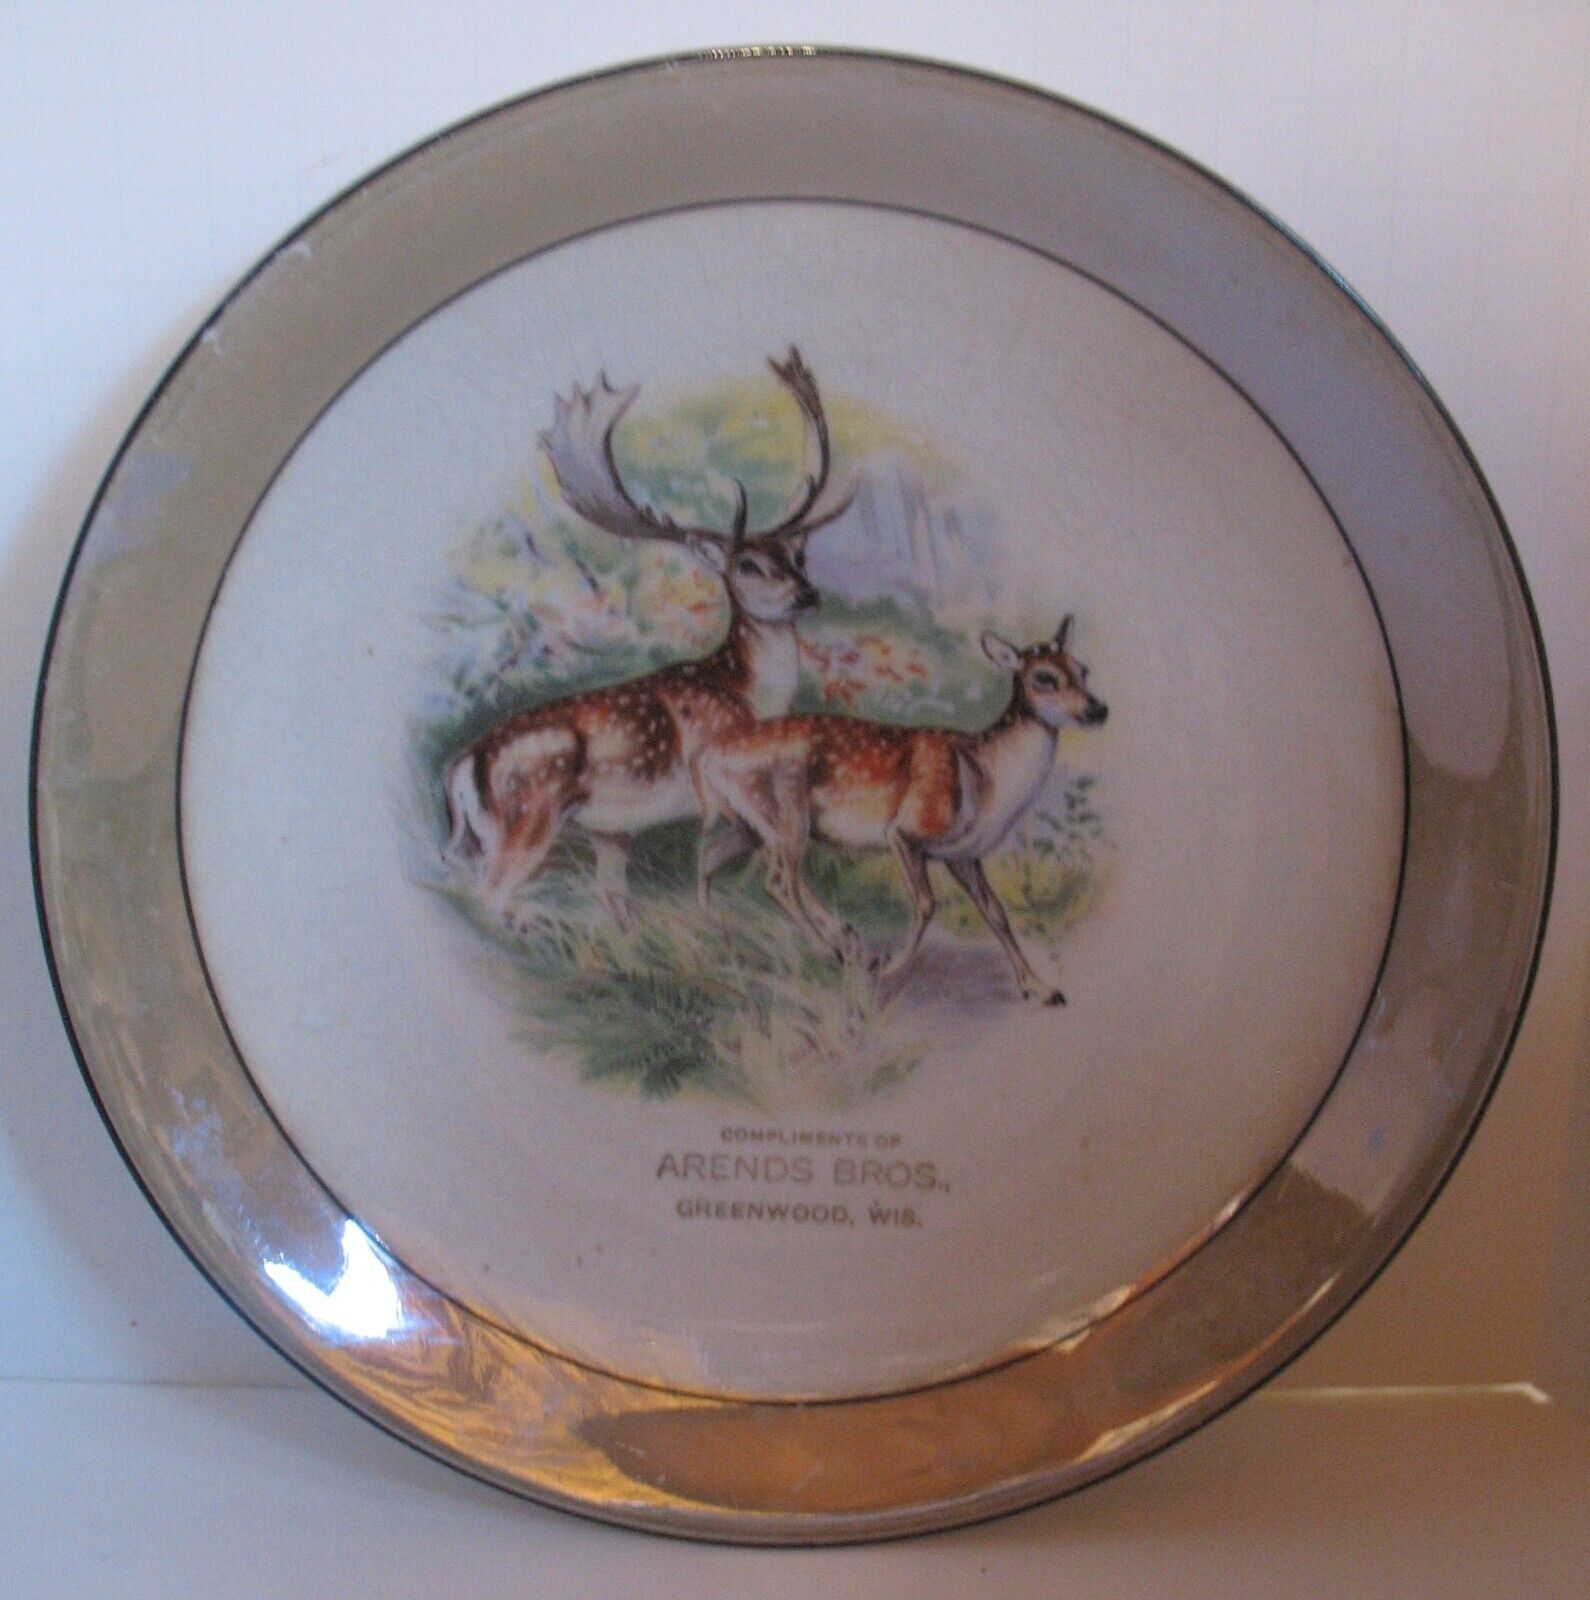 Ant. D E McNicol Arends Bros. Greenwood Wis Lustered Advertising Souvenir Plate